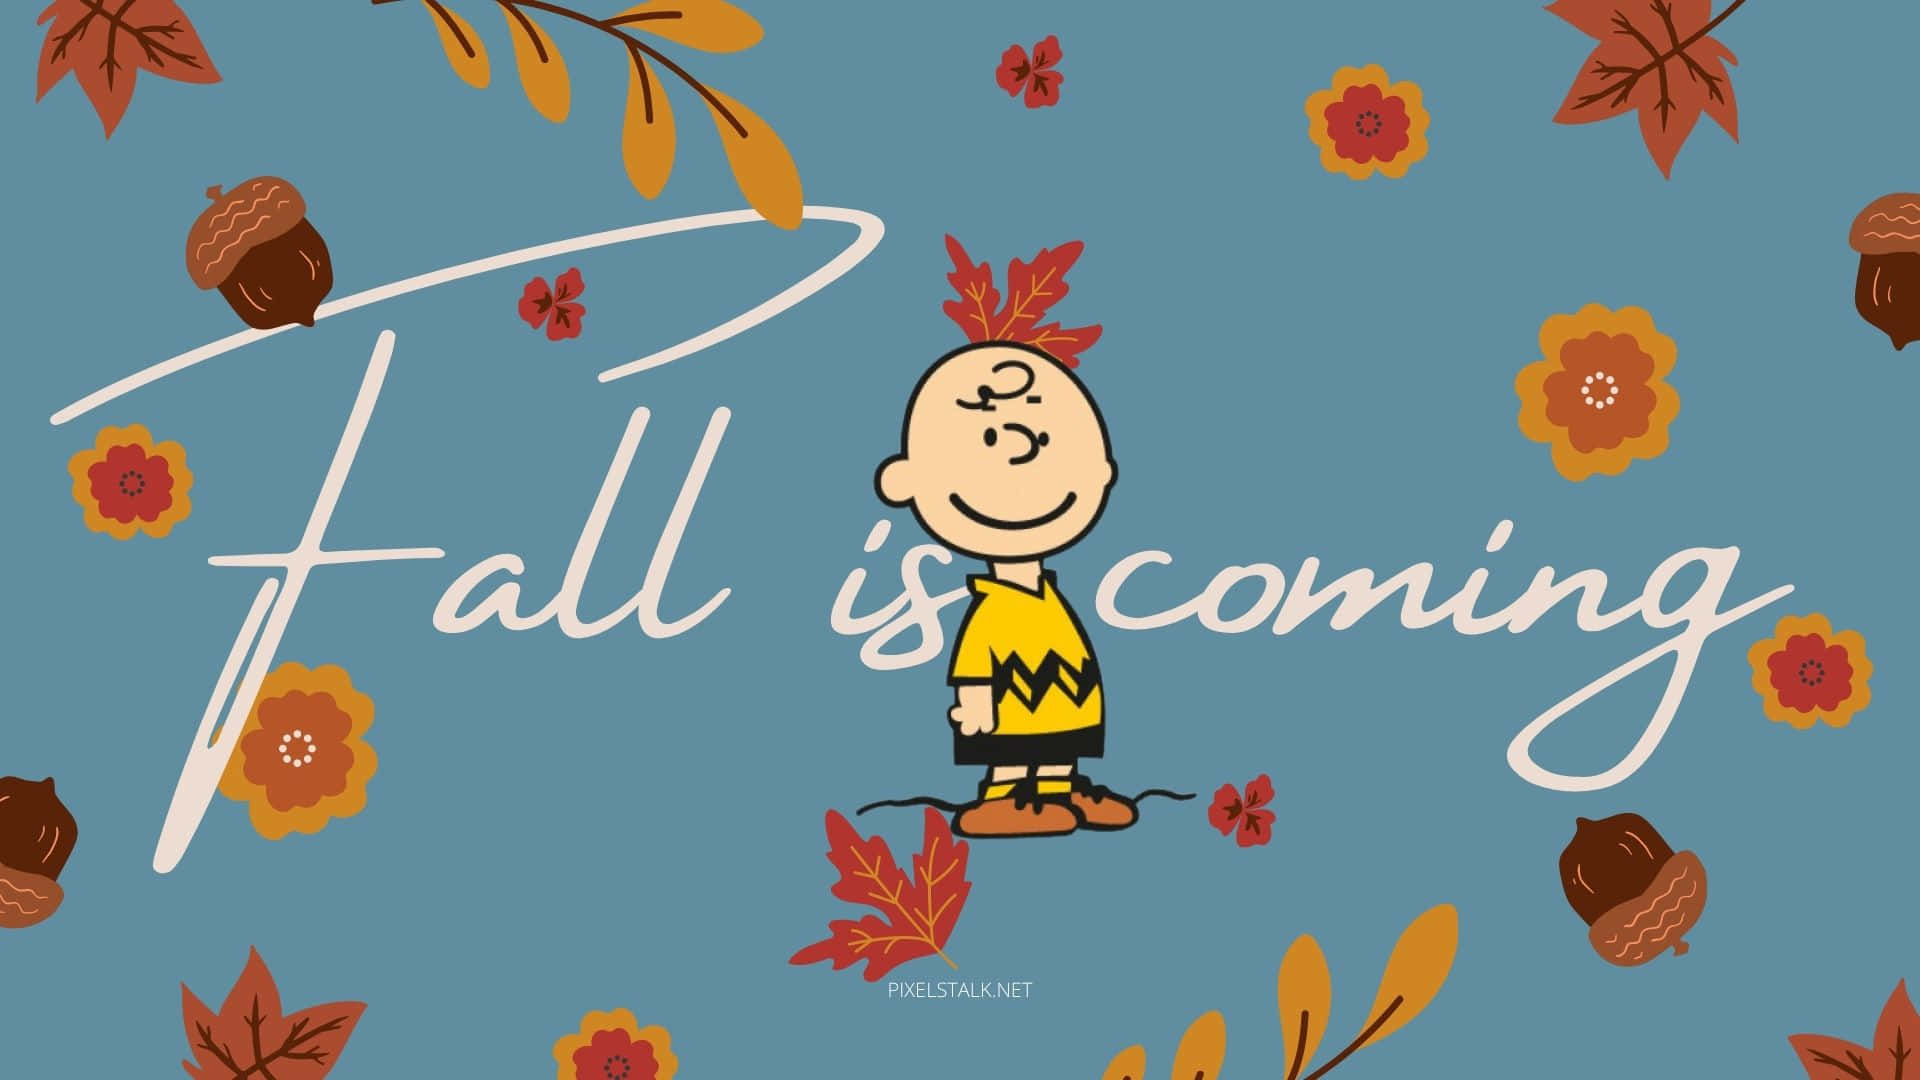 Snoopy scenes a beautiful fall day Wallpaper